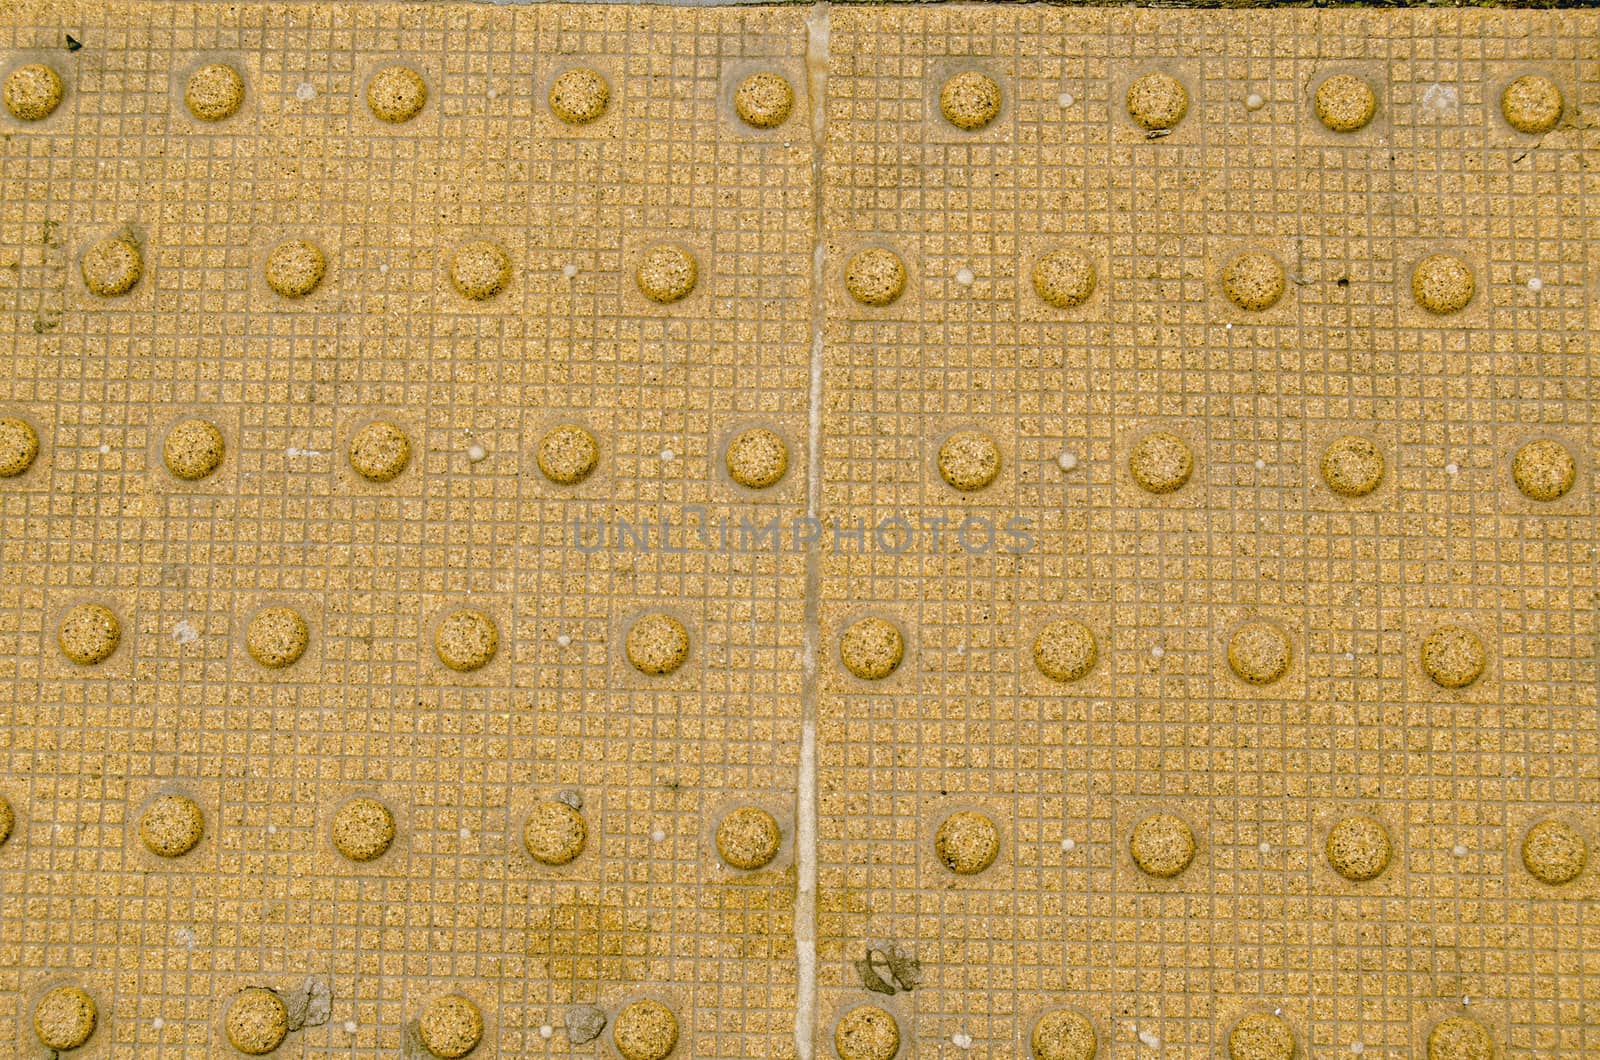 Detail of the internationally used tactile paving to help visually impaired people. These truncated domes are marking the edge of a railway platform.